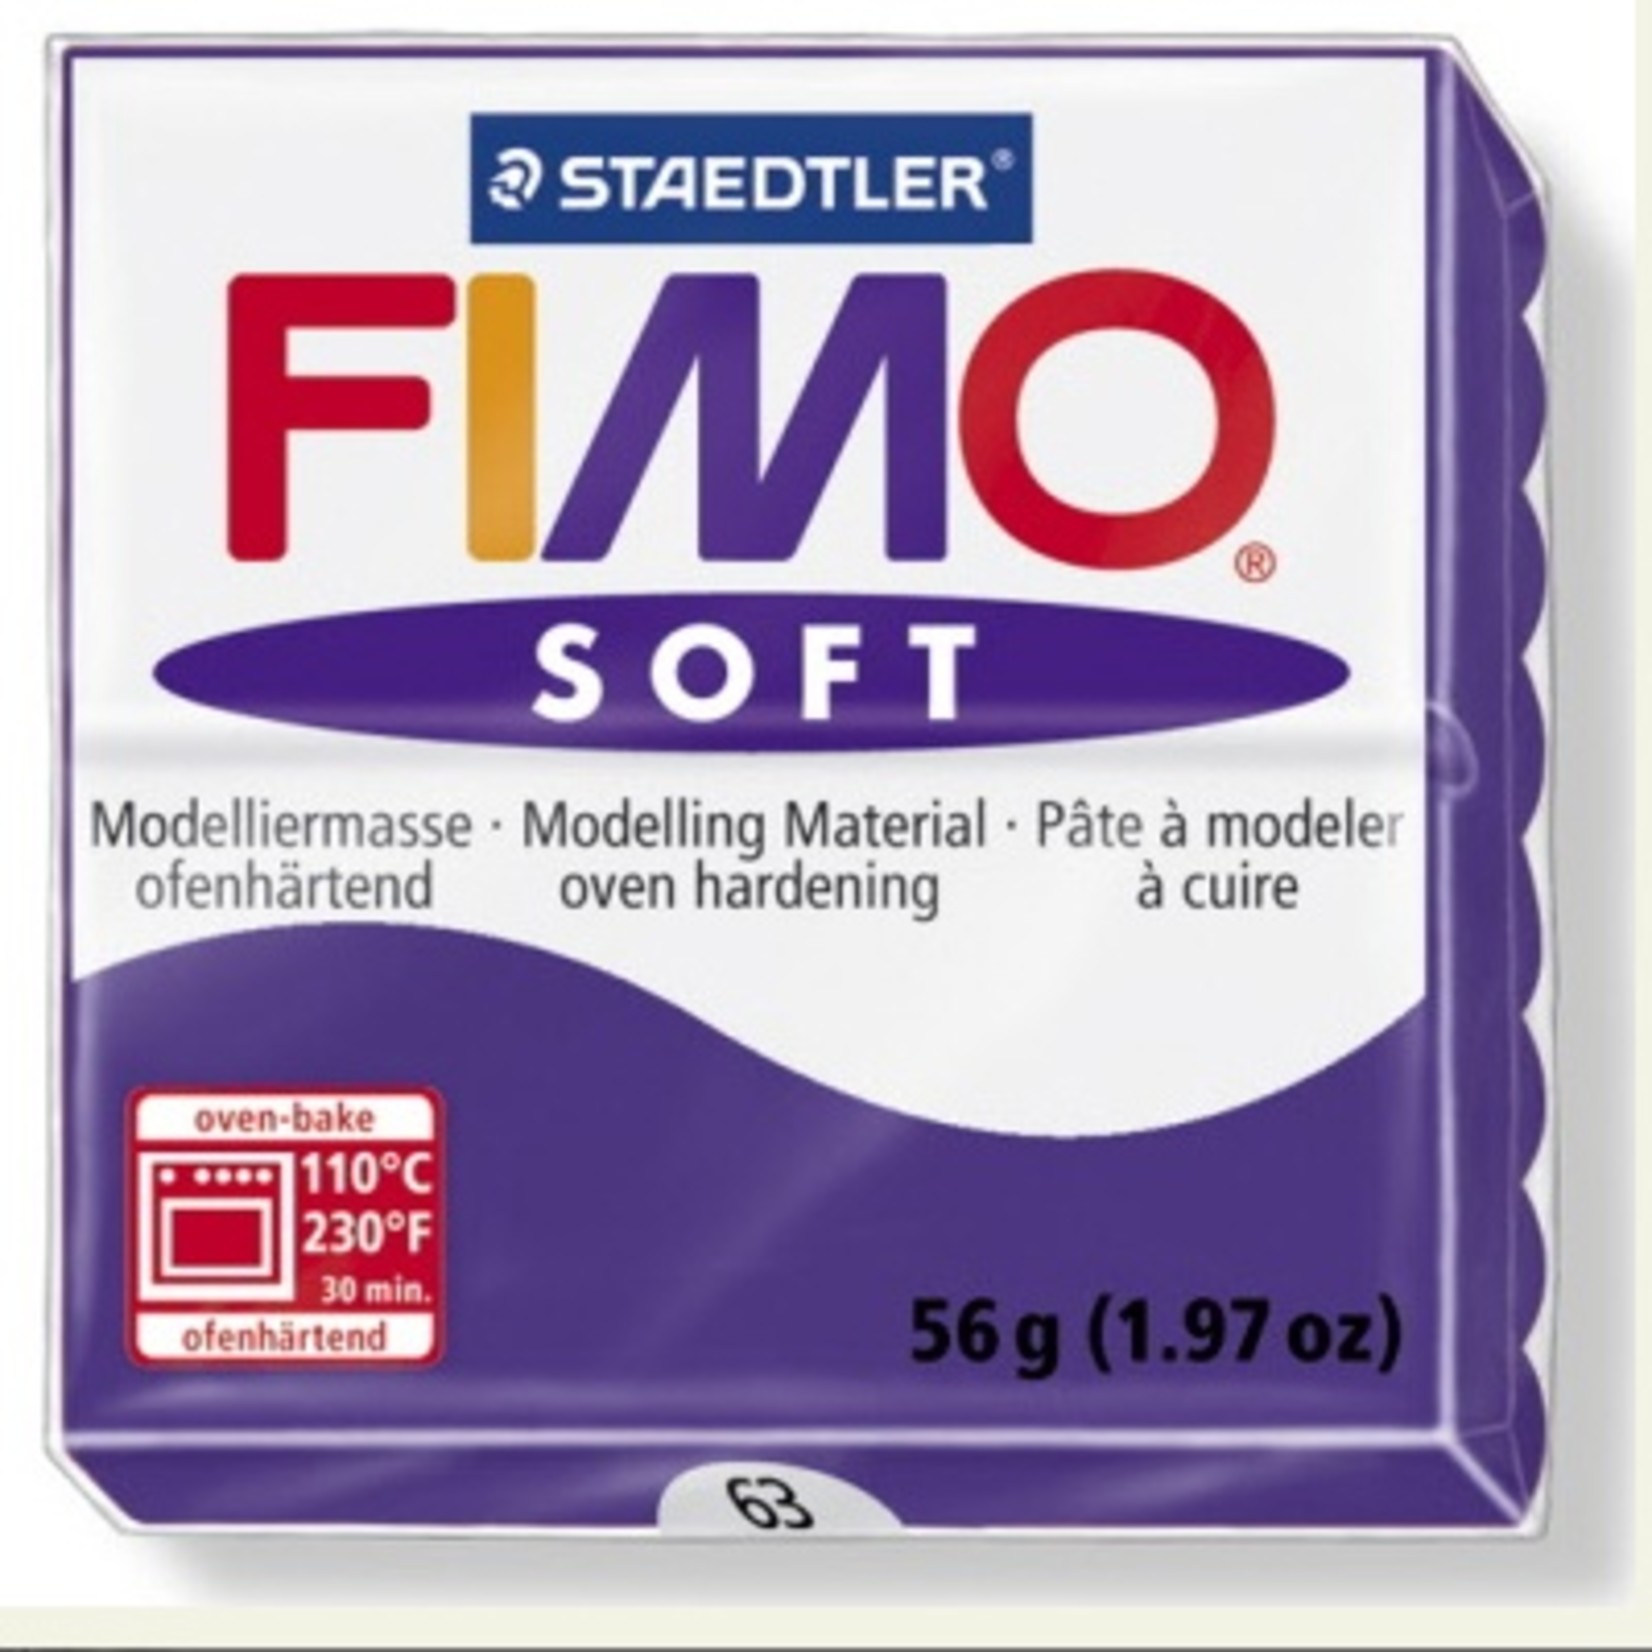 STAEDTLER FIMO SOFT OVEN BAKE CLAY 63 PLUM 57G